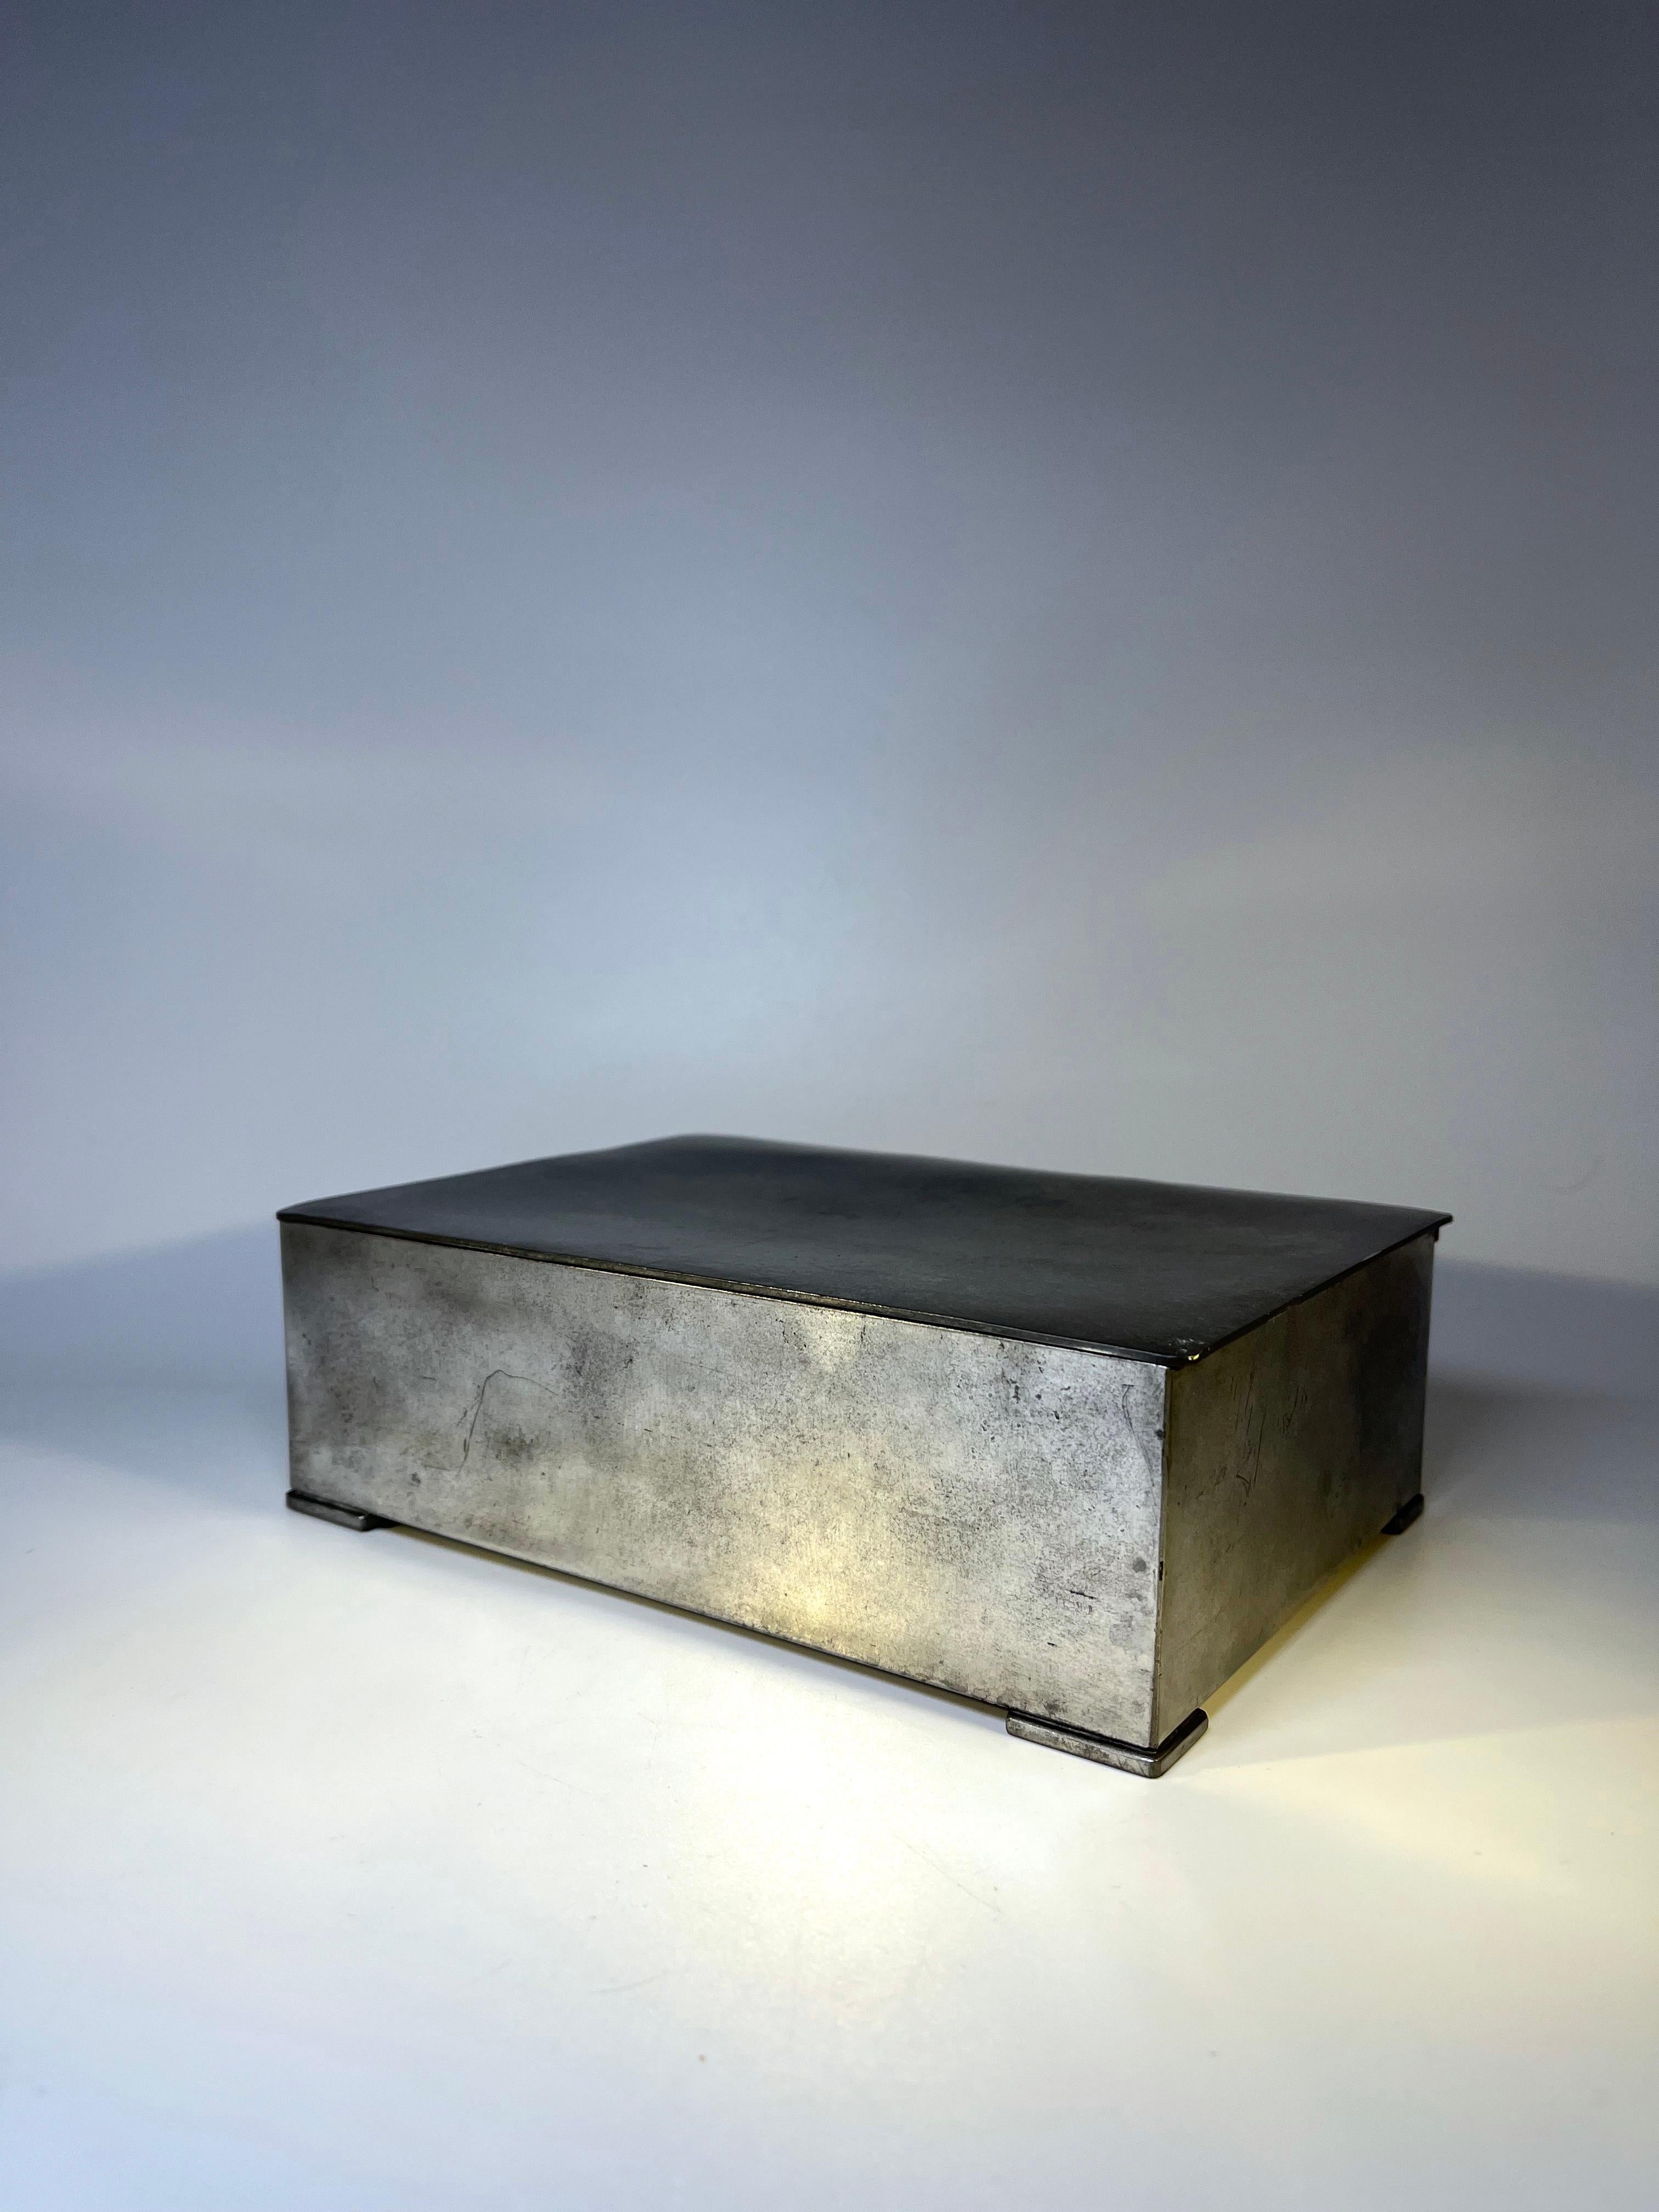 Danish Just Andersen, pewter hinged cigar box, lined with birchwood
Sits on four pewter feet, is fully functional with excellent interior
Circa 1930's
Stamped and numbered 1092 
Height 2.5 inch, Width 7.75 inch, Depth 5.5 inch
In very good